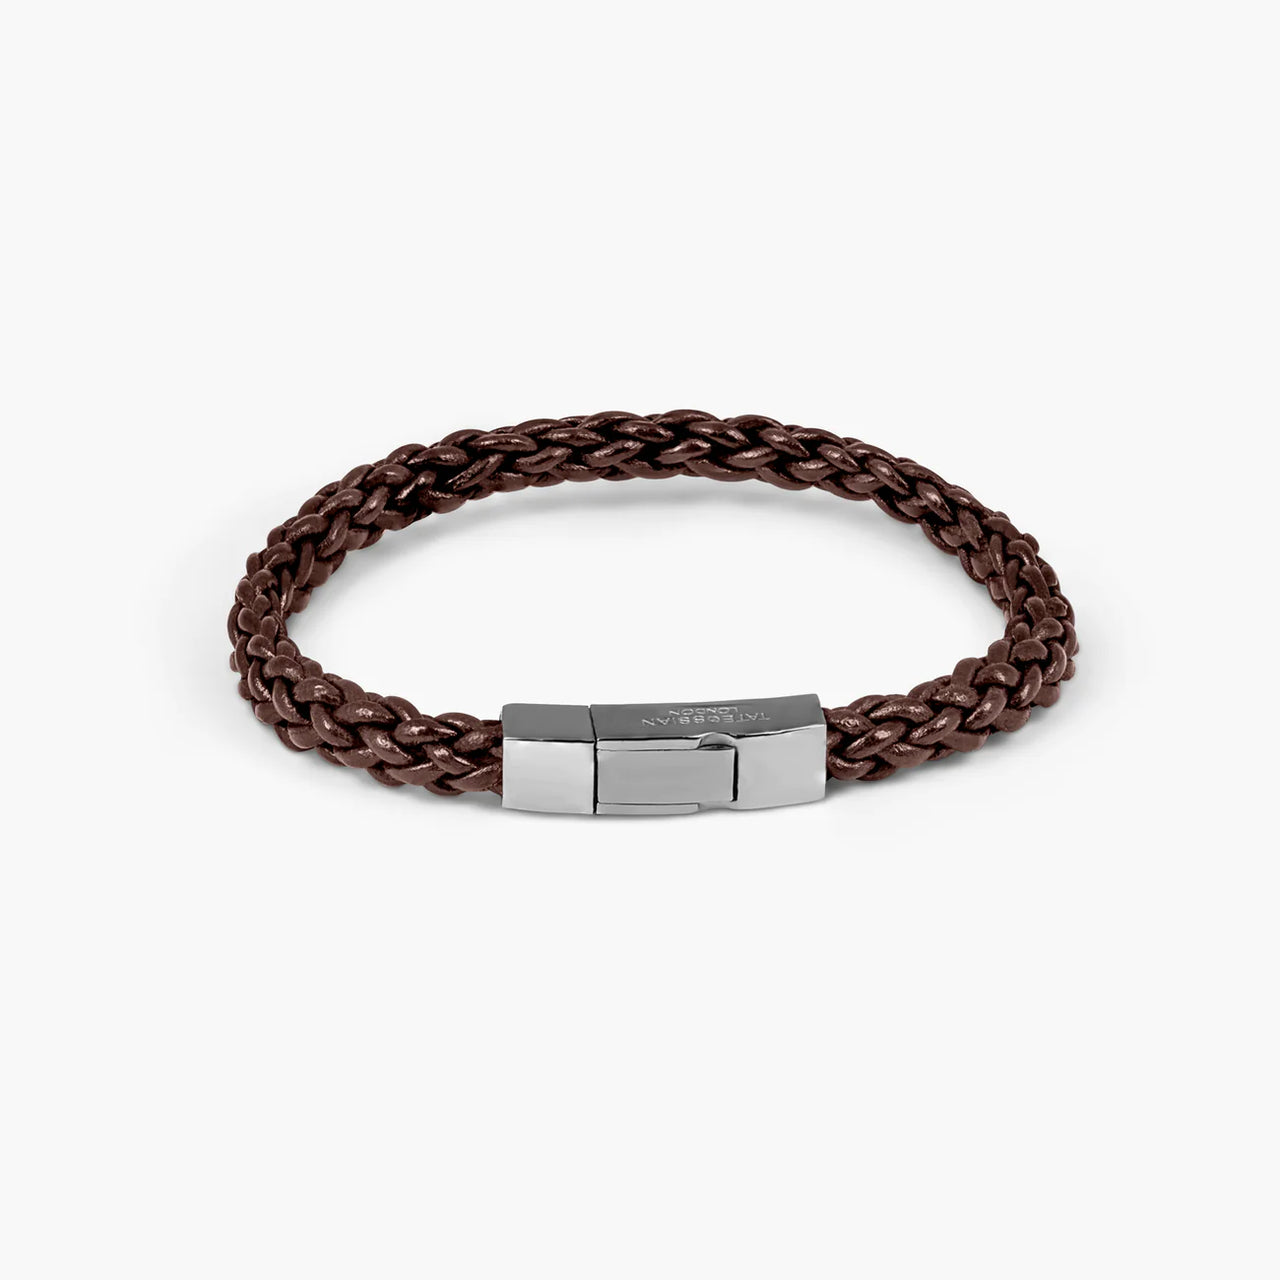 Tateossian Click Trenza Bracelet in Italian Brown Leather with Black Rhodium Plated Sterling Silver